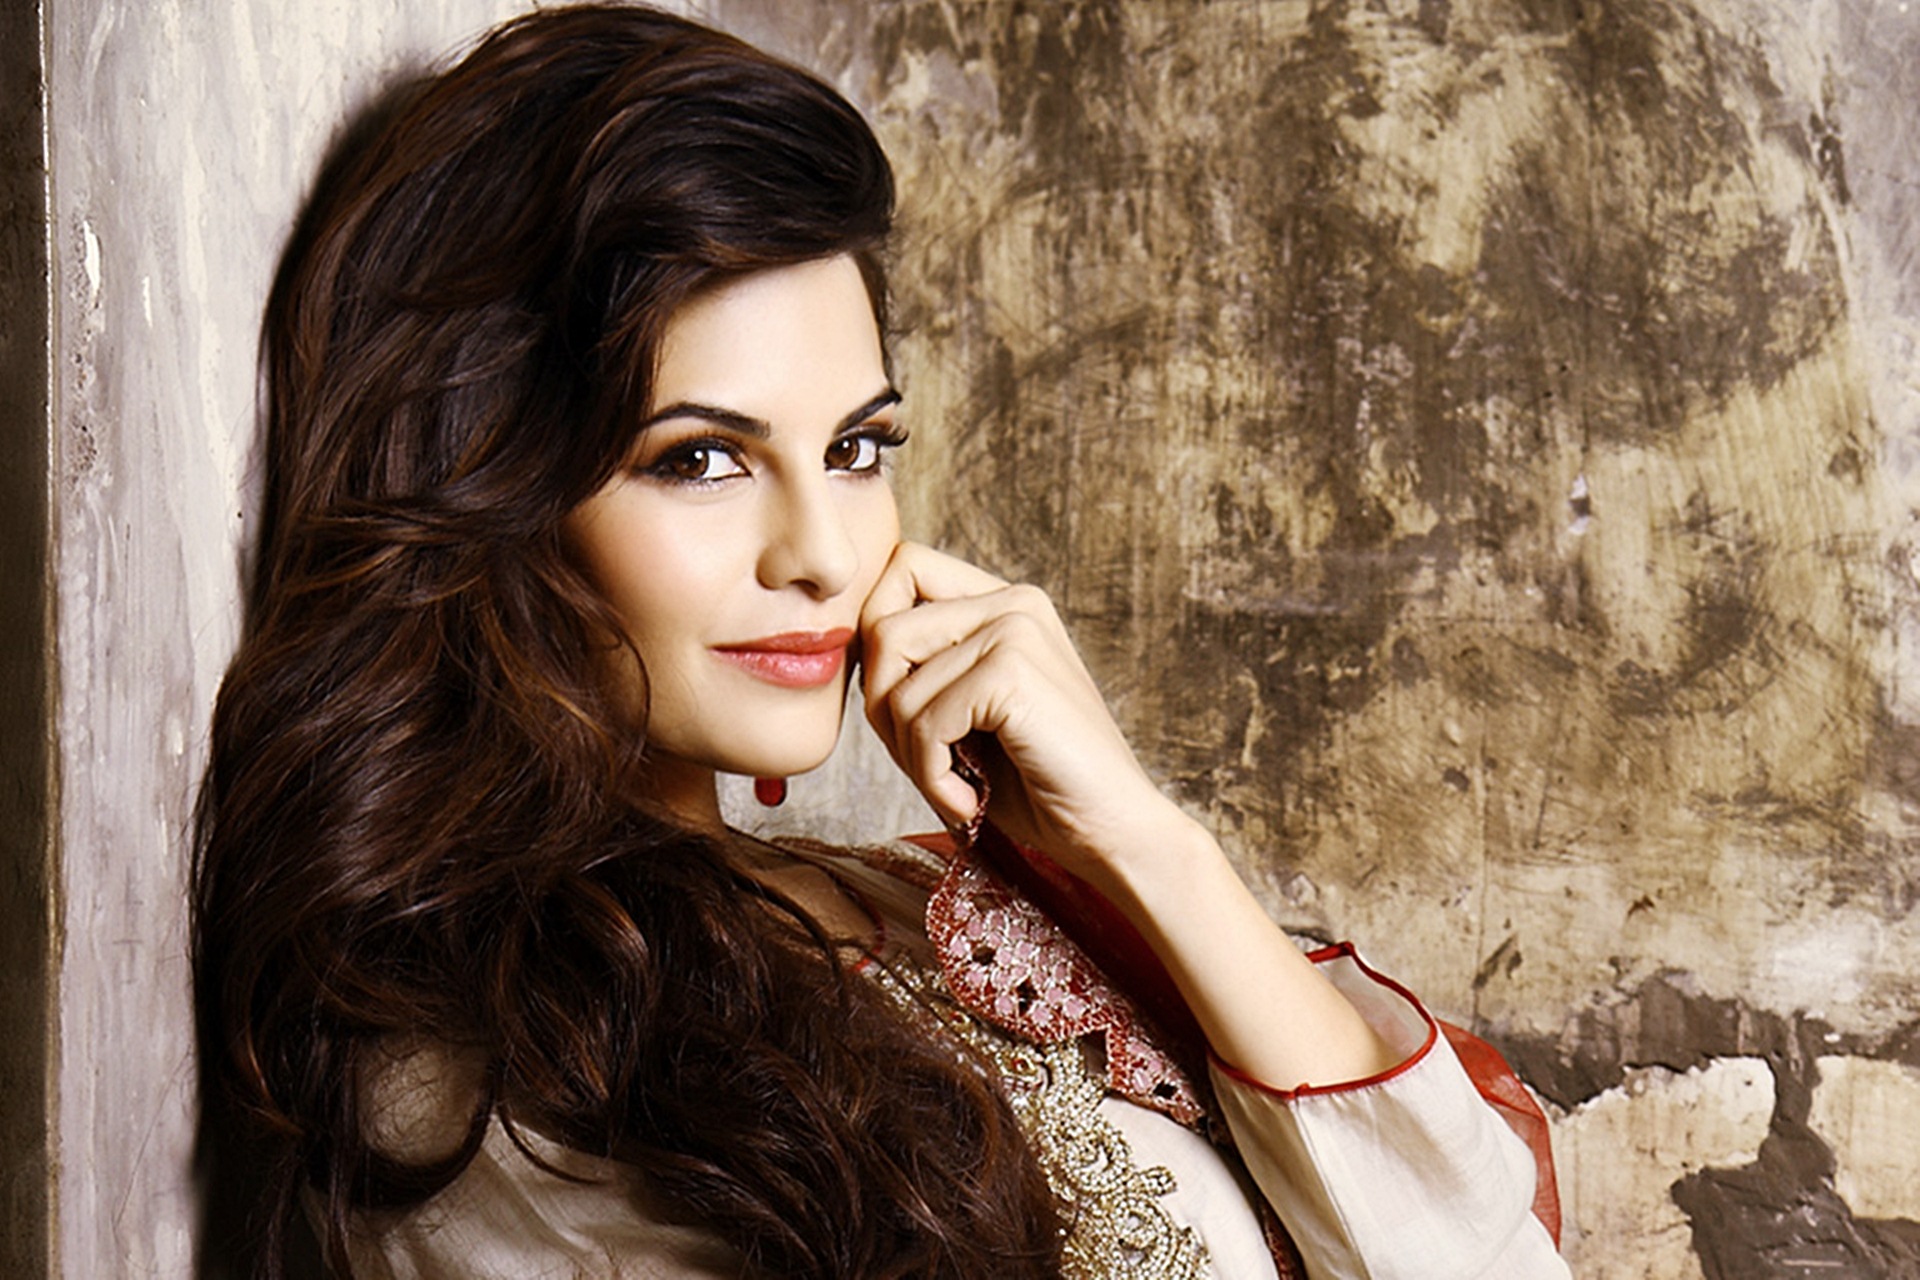 Awesome Jacqueline Fernandez Wallpaper Full HD Pictures